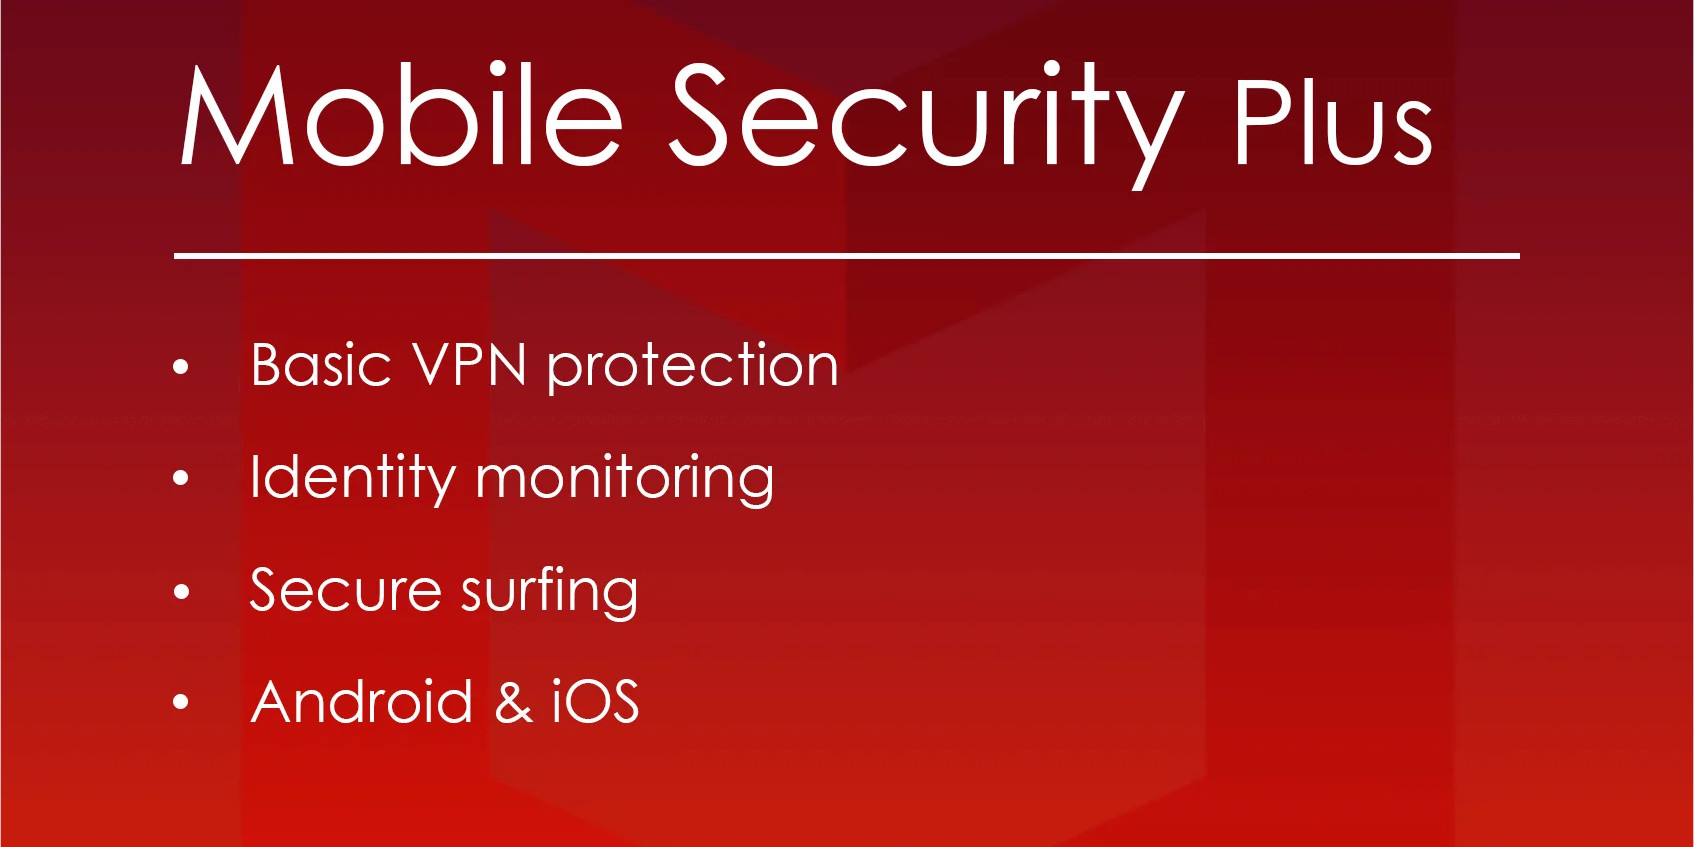 McAfee Mobile Security Plus VPN Key (1 Year / Unlimited Devices) 6.75 $